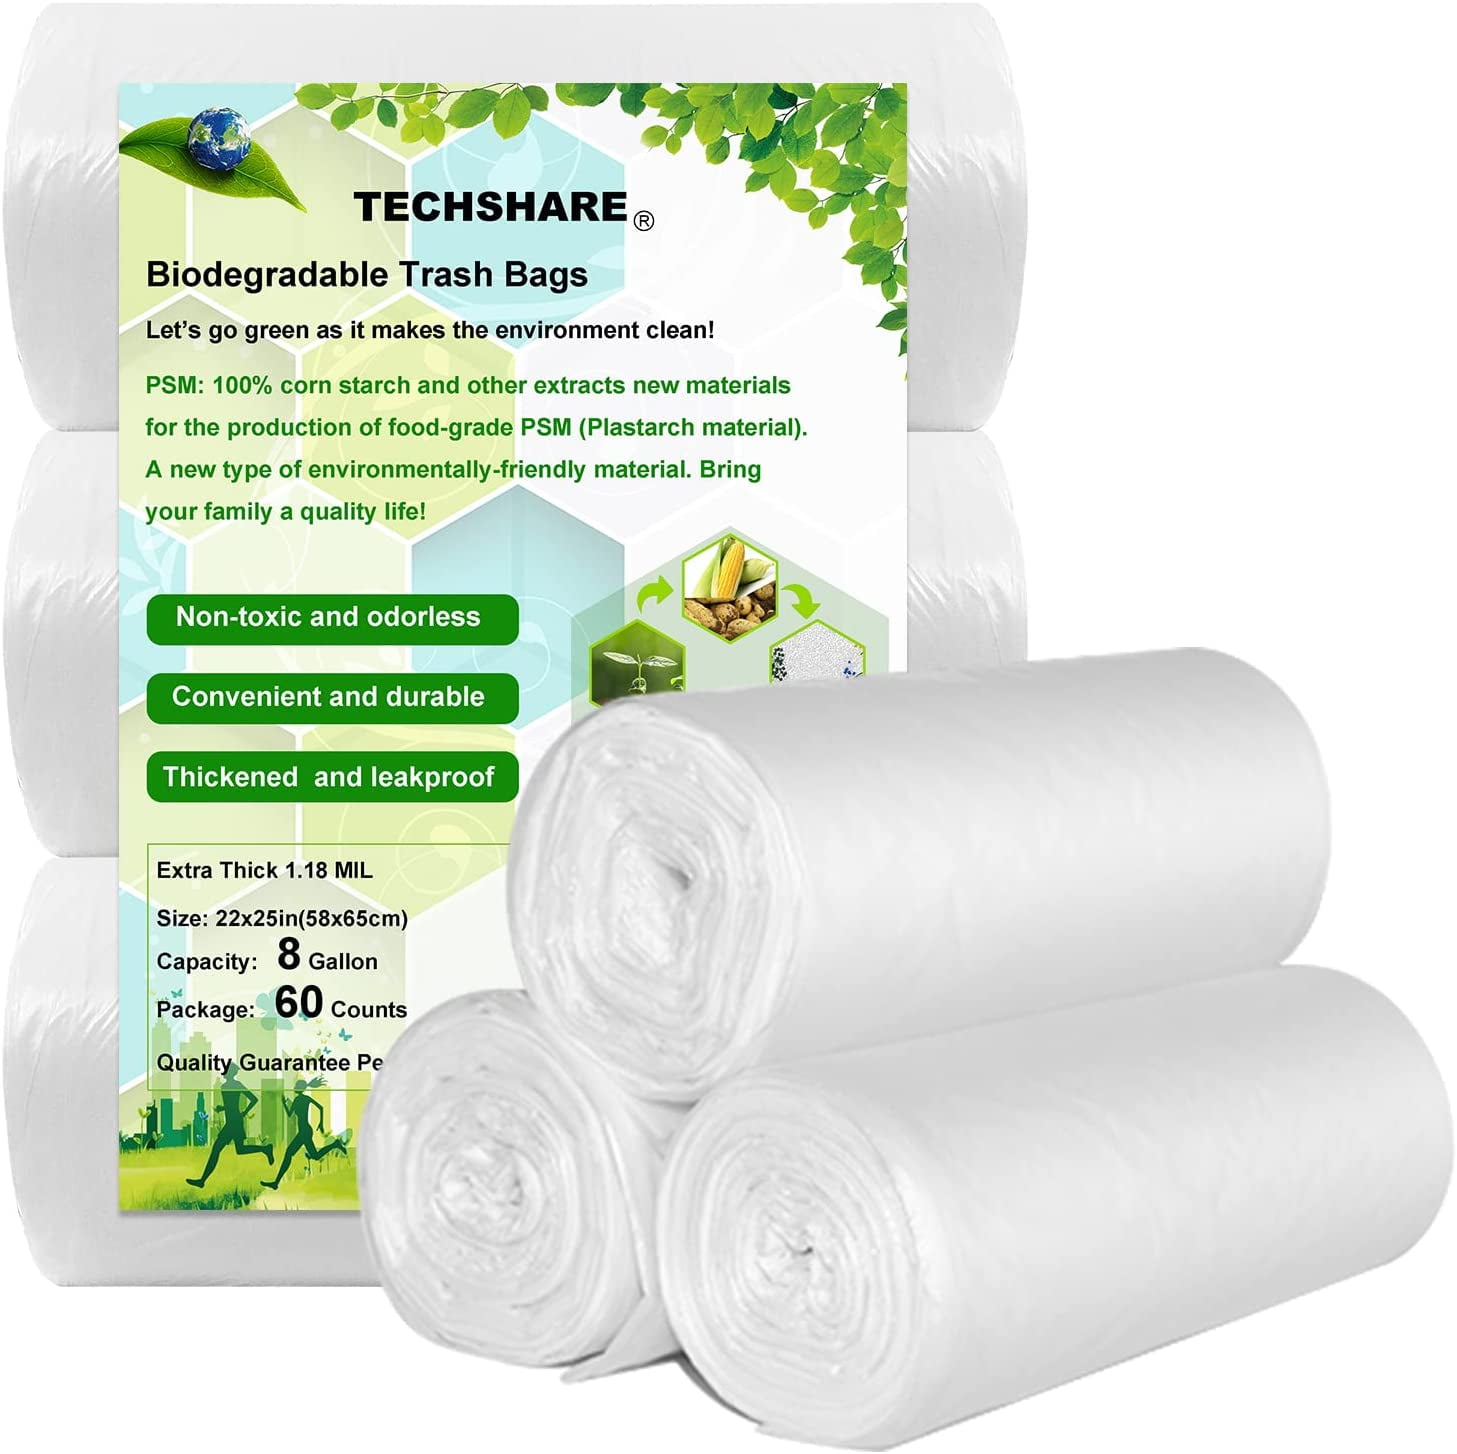 1.2 Gallon Strong Trash Bags Garbage Bags, Bathroom Trash Can Bin Liners,  Small Plastic Bags for home office kitchen, fit 5-6 Liter, 0.8-1.6 and  1-1.5 Gal, Clear (80 counts) 